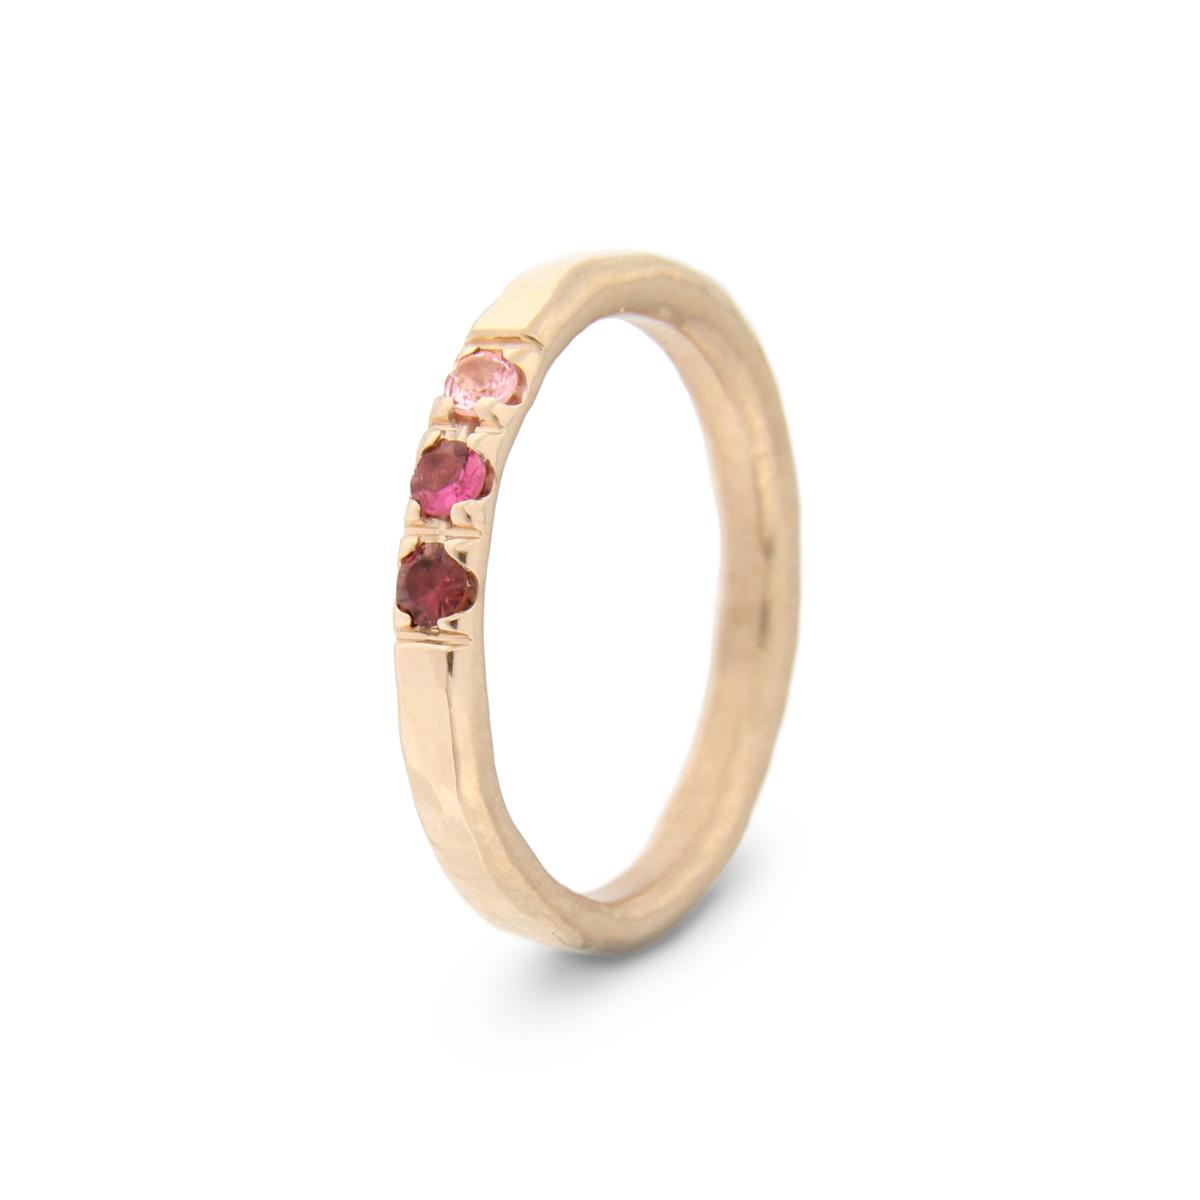 Katie g. Jewellery - Hammered Ring 2,0 - 14kt. Roségold - Turmaline in three different shades of pink